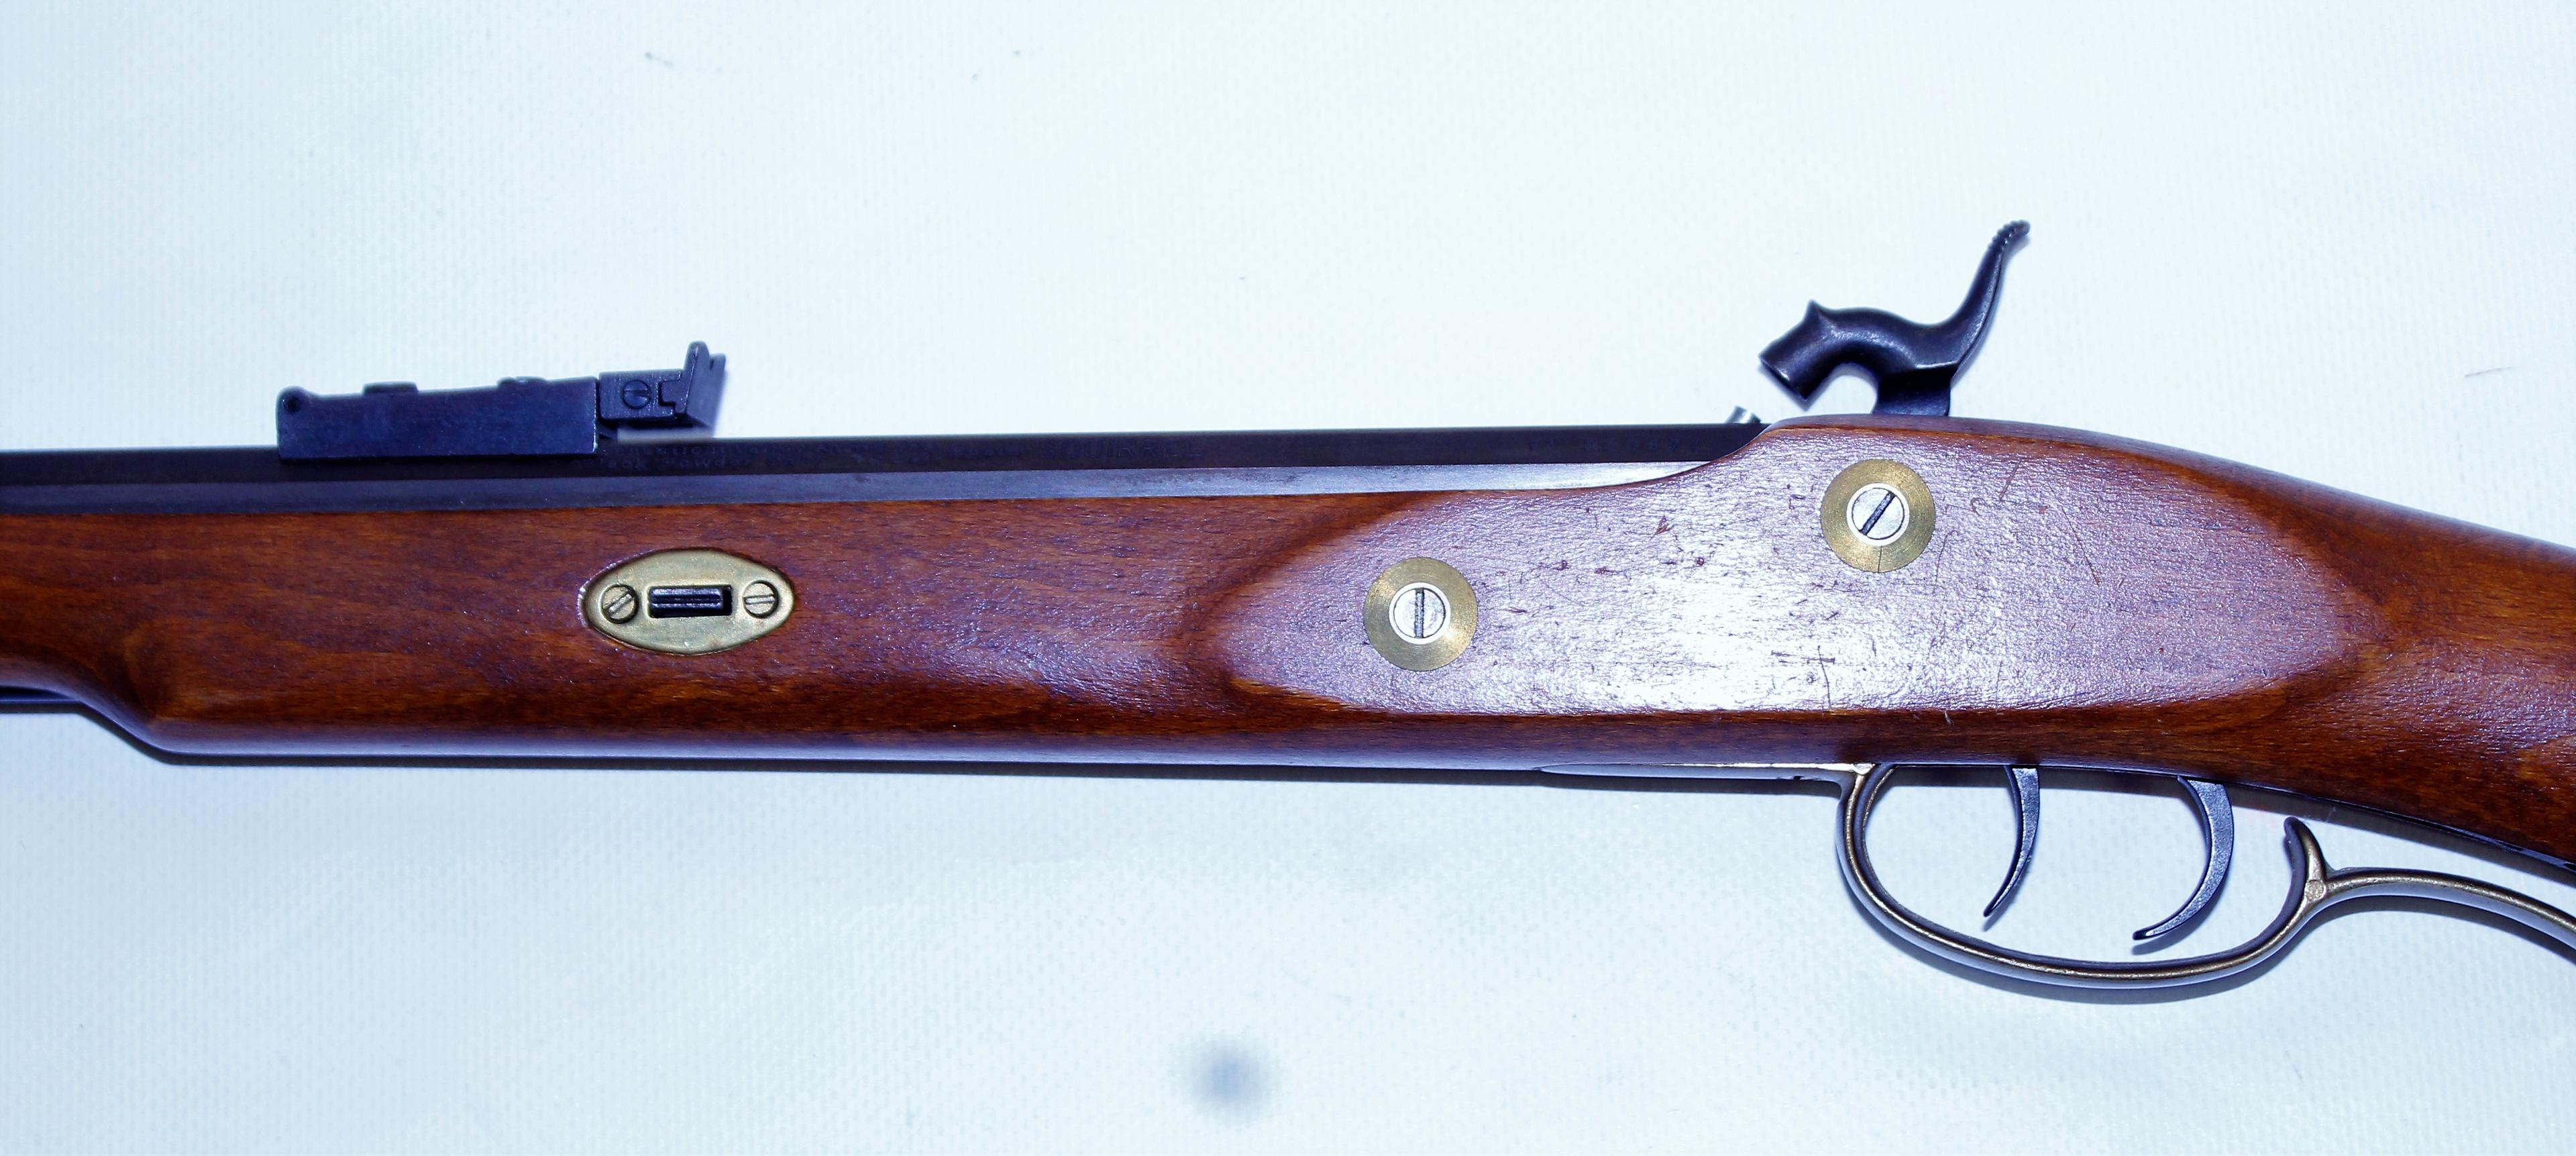 Connecticut Valley Arms 32 cal muzzleloading